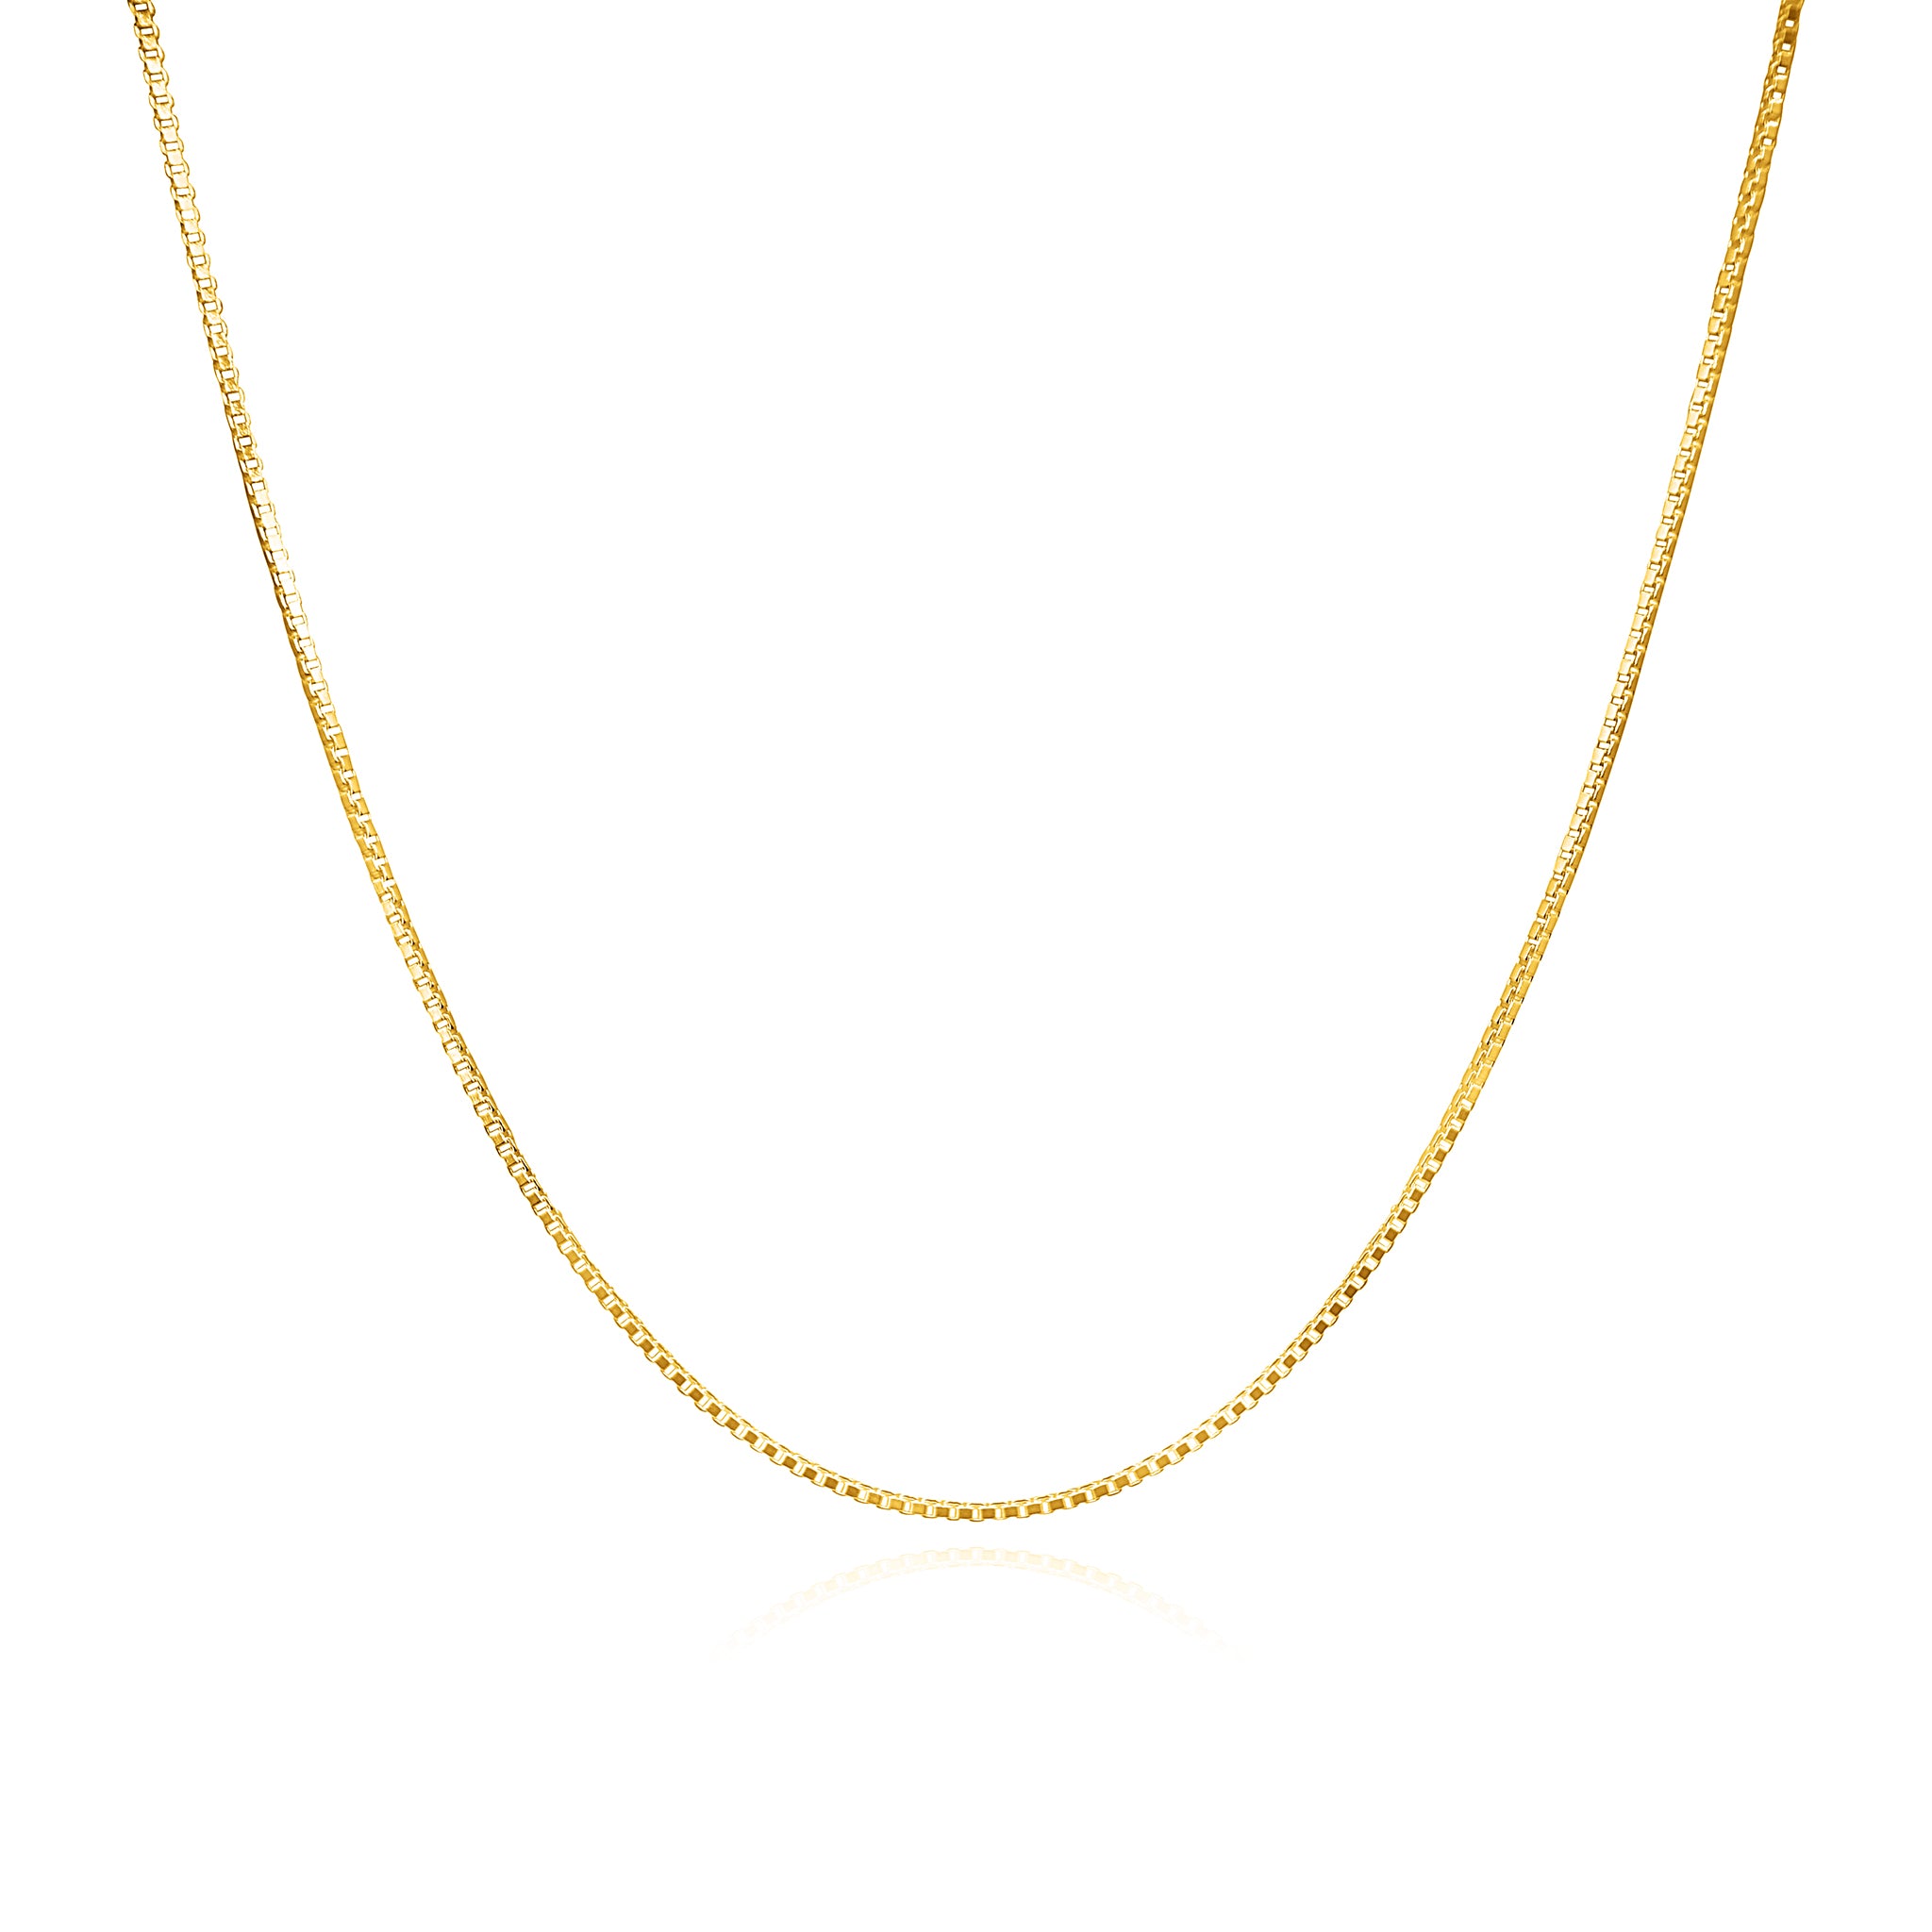 Bolo Adjustable Chain | Buy 18kt Gold Necklaces Online | STAC Fine Jewellery